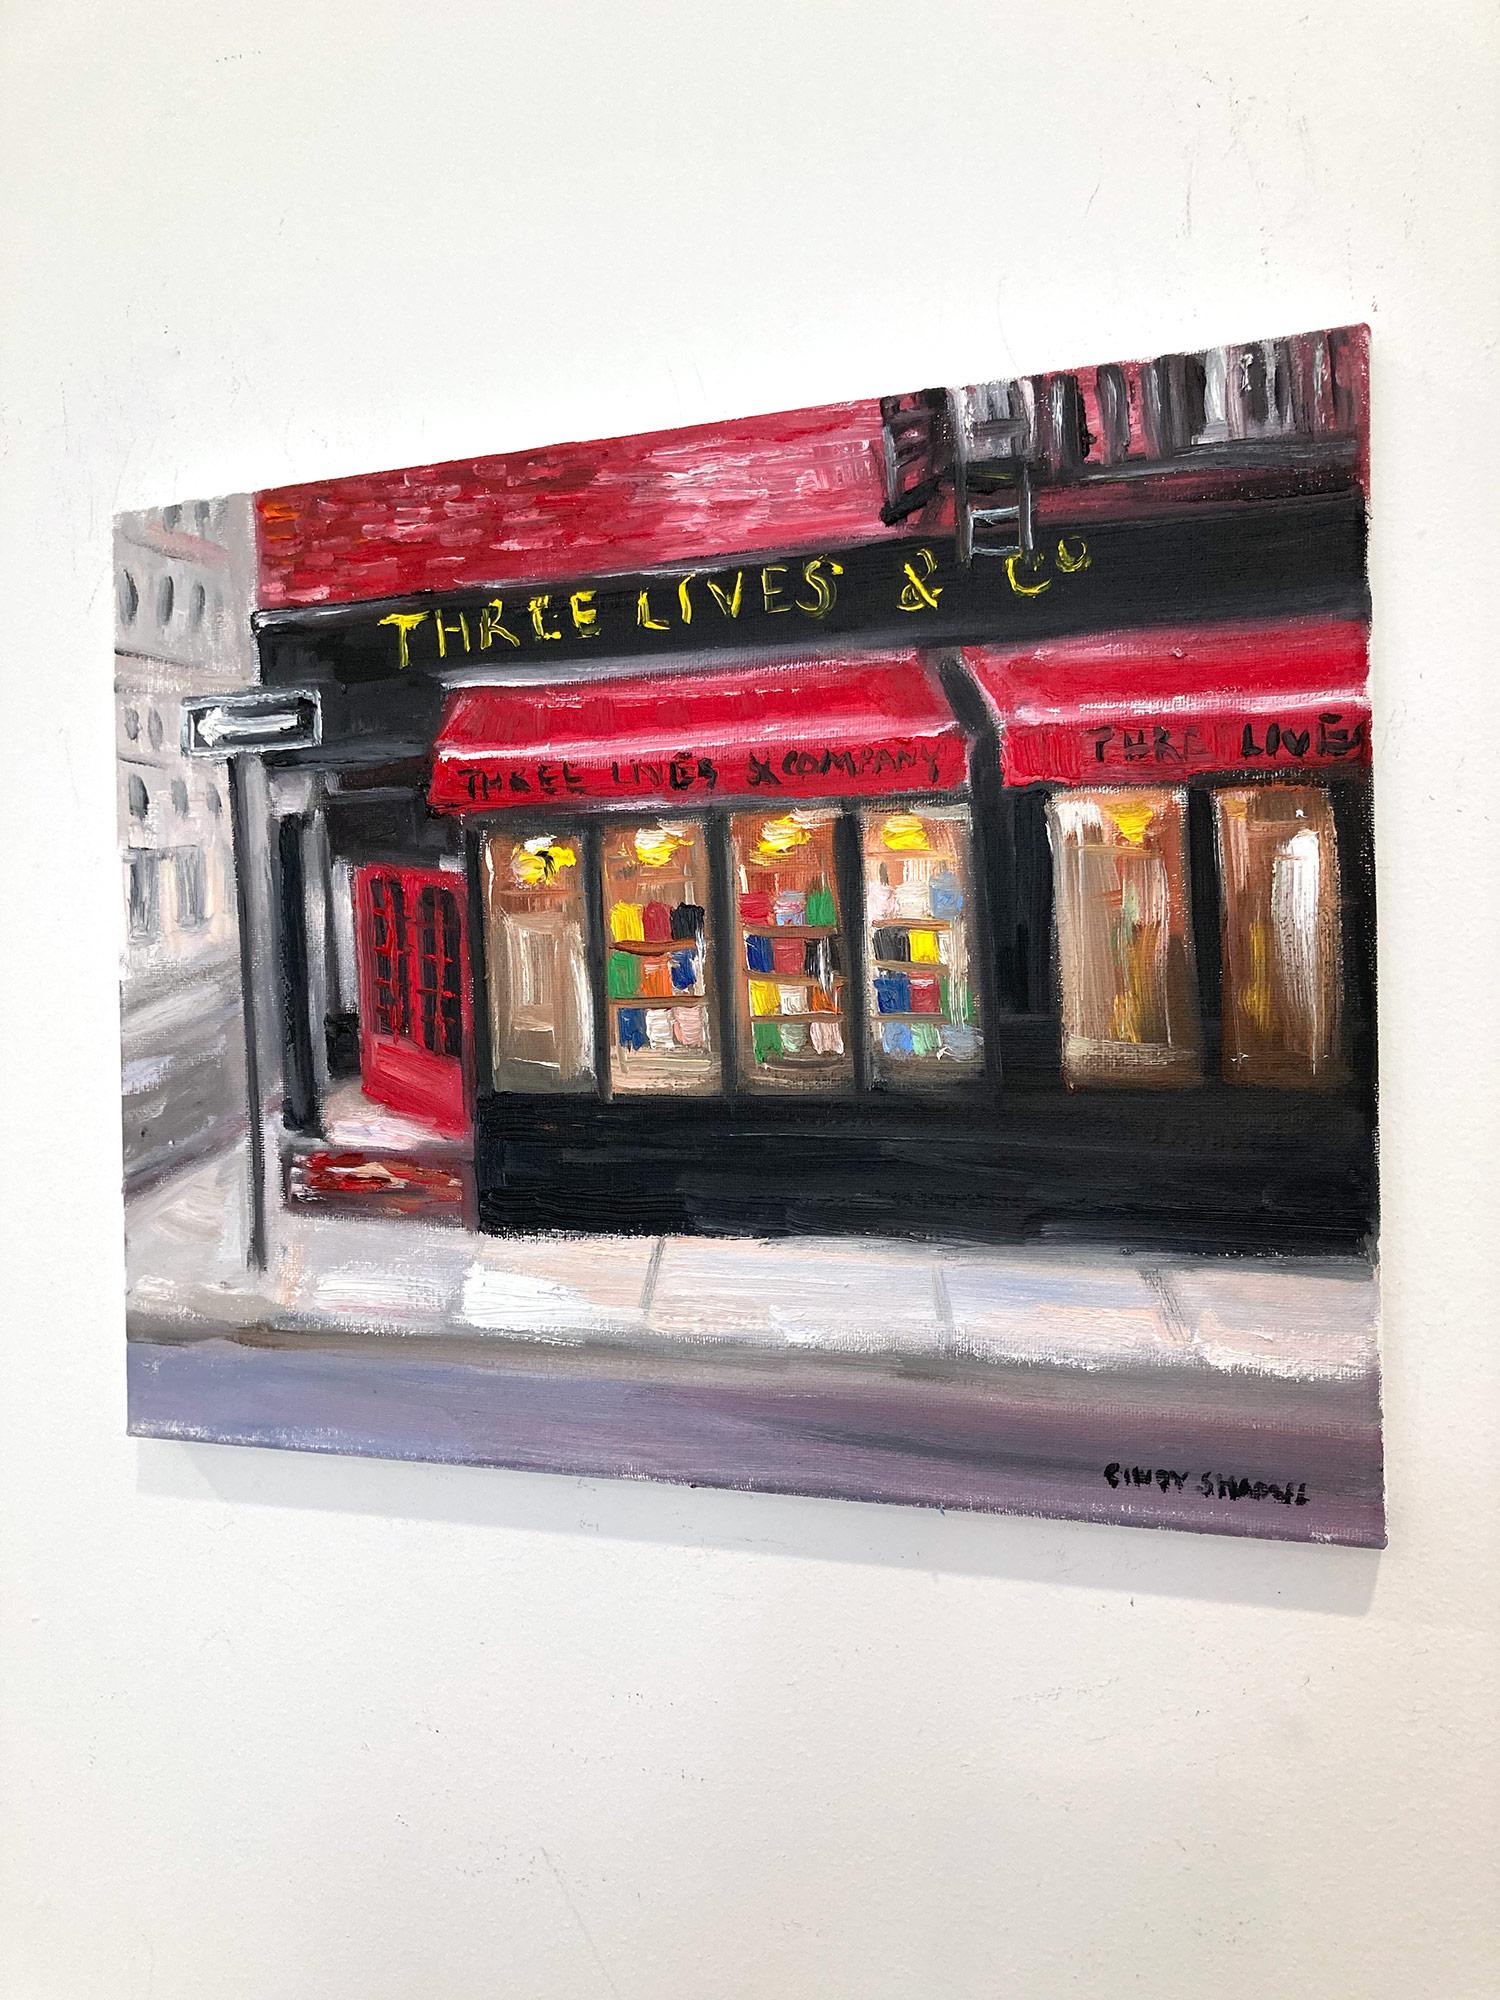 A charming depiction of Three Lives and Co. Book Store located in the West Village in Manhattan. A cozy impressionistic street scene with colors of vibrant red, lush greens, and yellow ochres. This painting was painted on sight by the artist. An